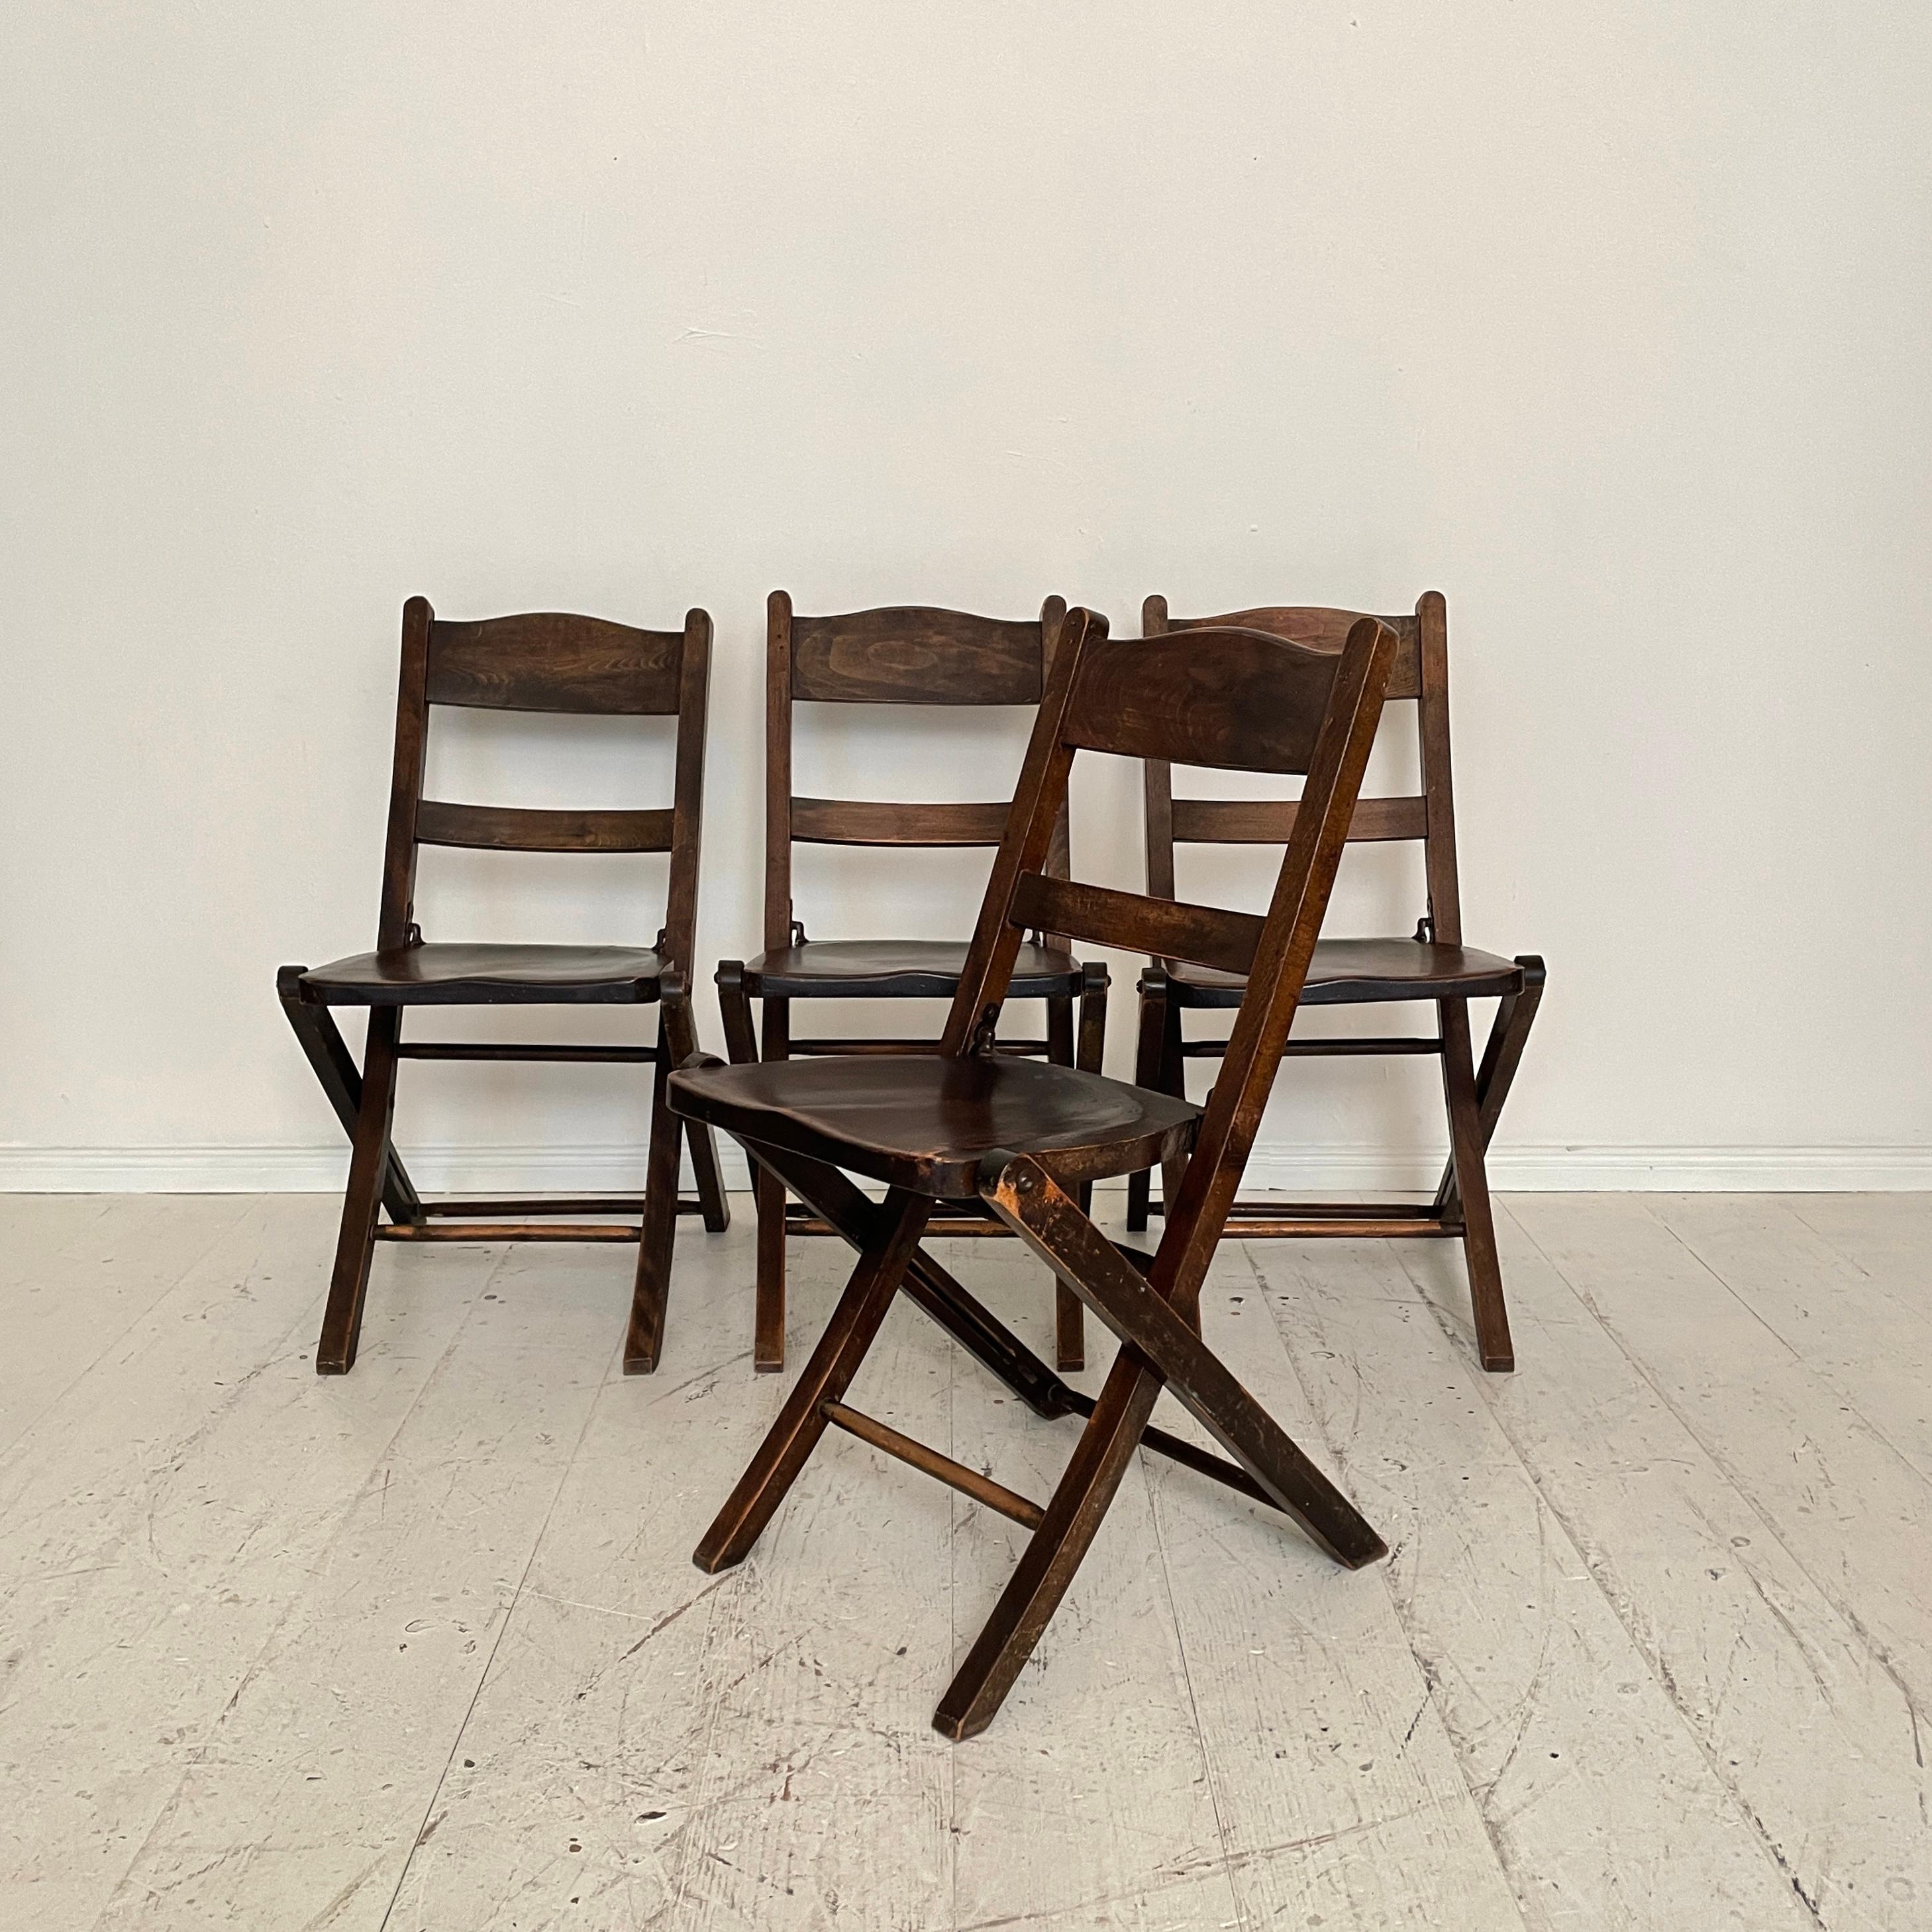 Mid-20th Century Set of 4 Art Deco Folding Chairs in Brown Beech and Ash, around 1930 For Sale